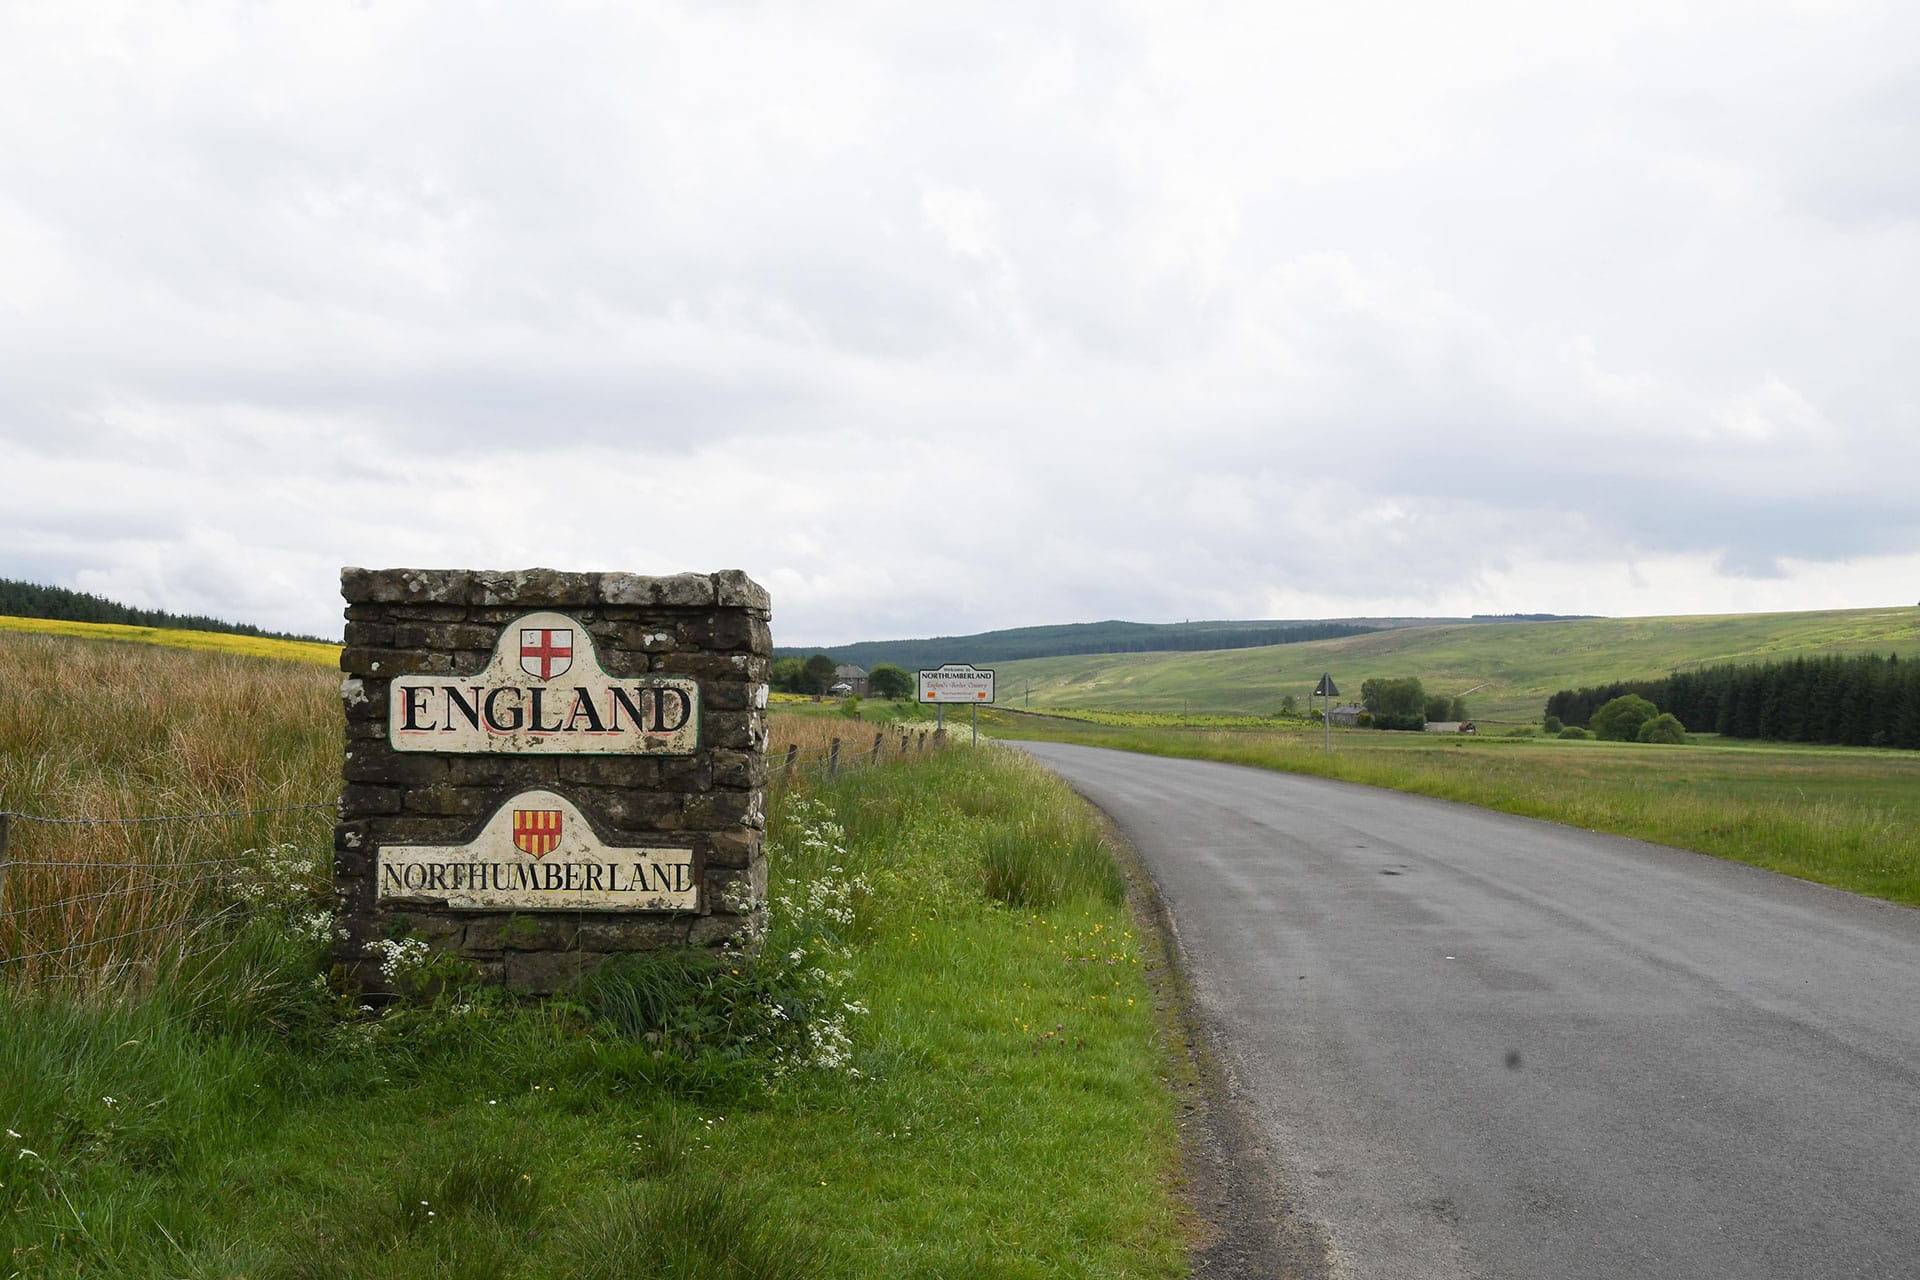 Scotland Motorcycle Tour, Day 2 - Arriving in Northumberland